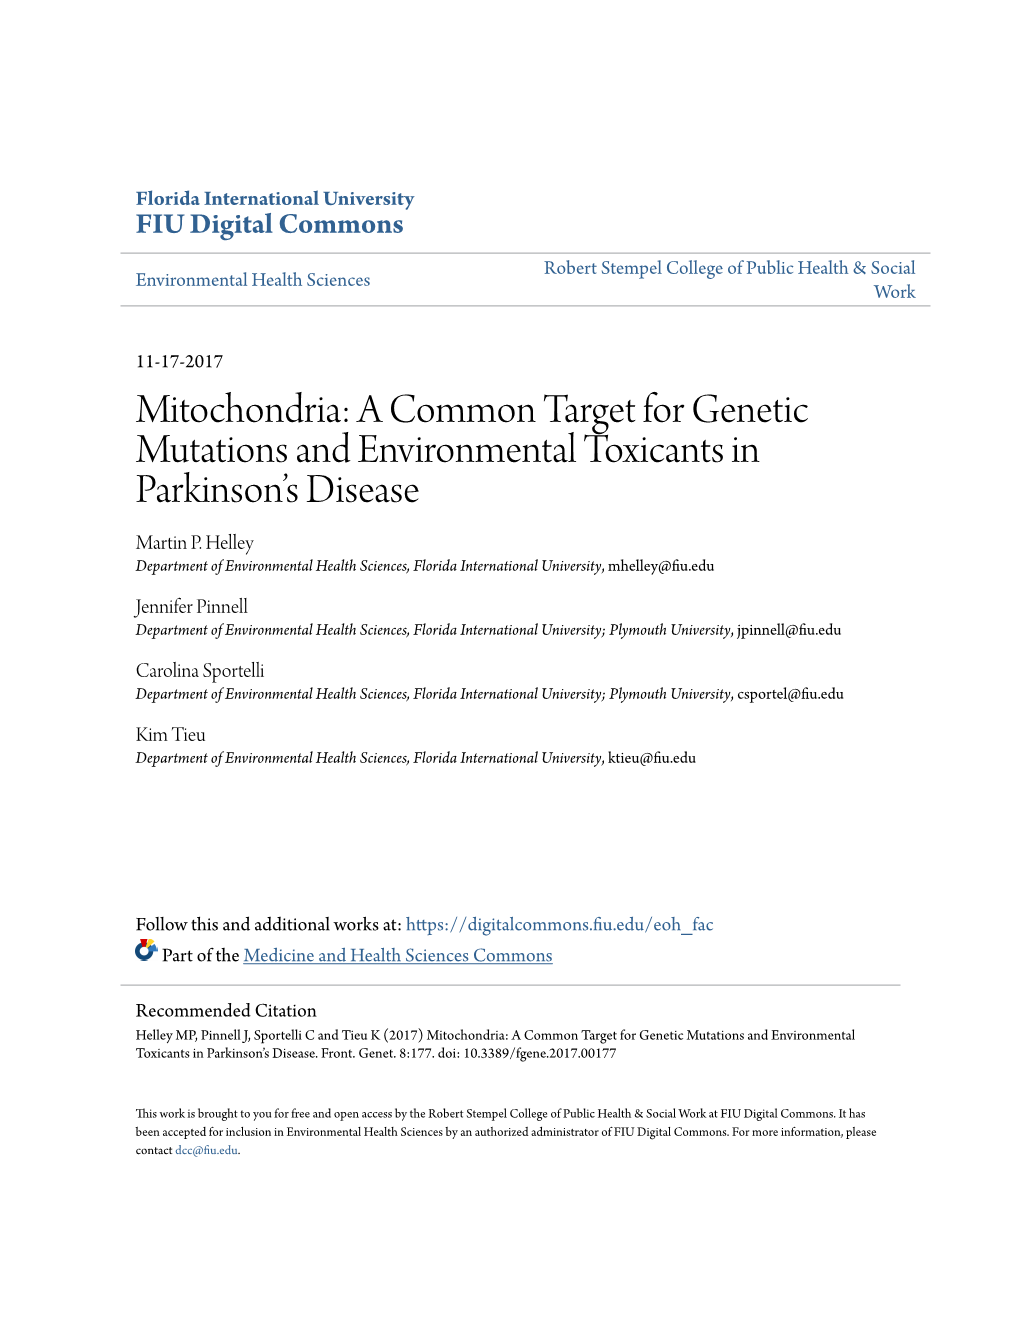 Mitochondria: a Common Target for Genetic Mutations and Environmental Toxicants in Parkinson’S Disease Martin P